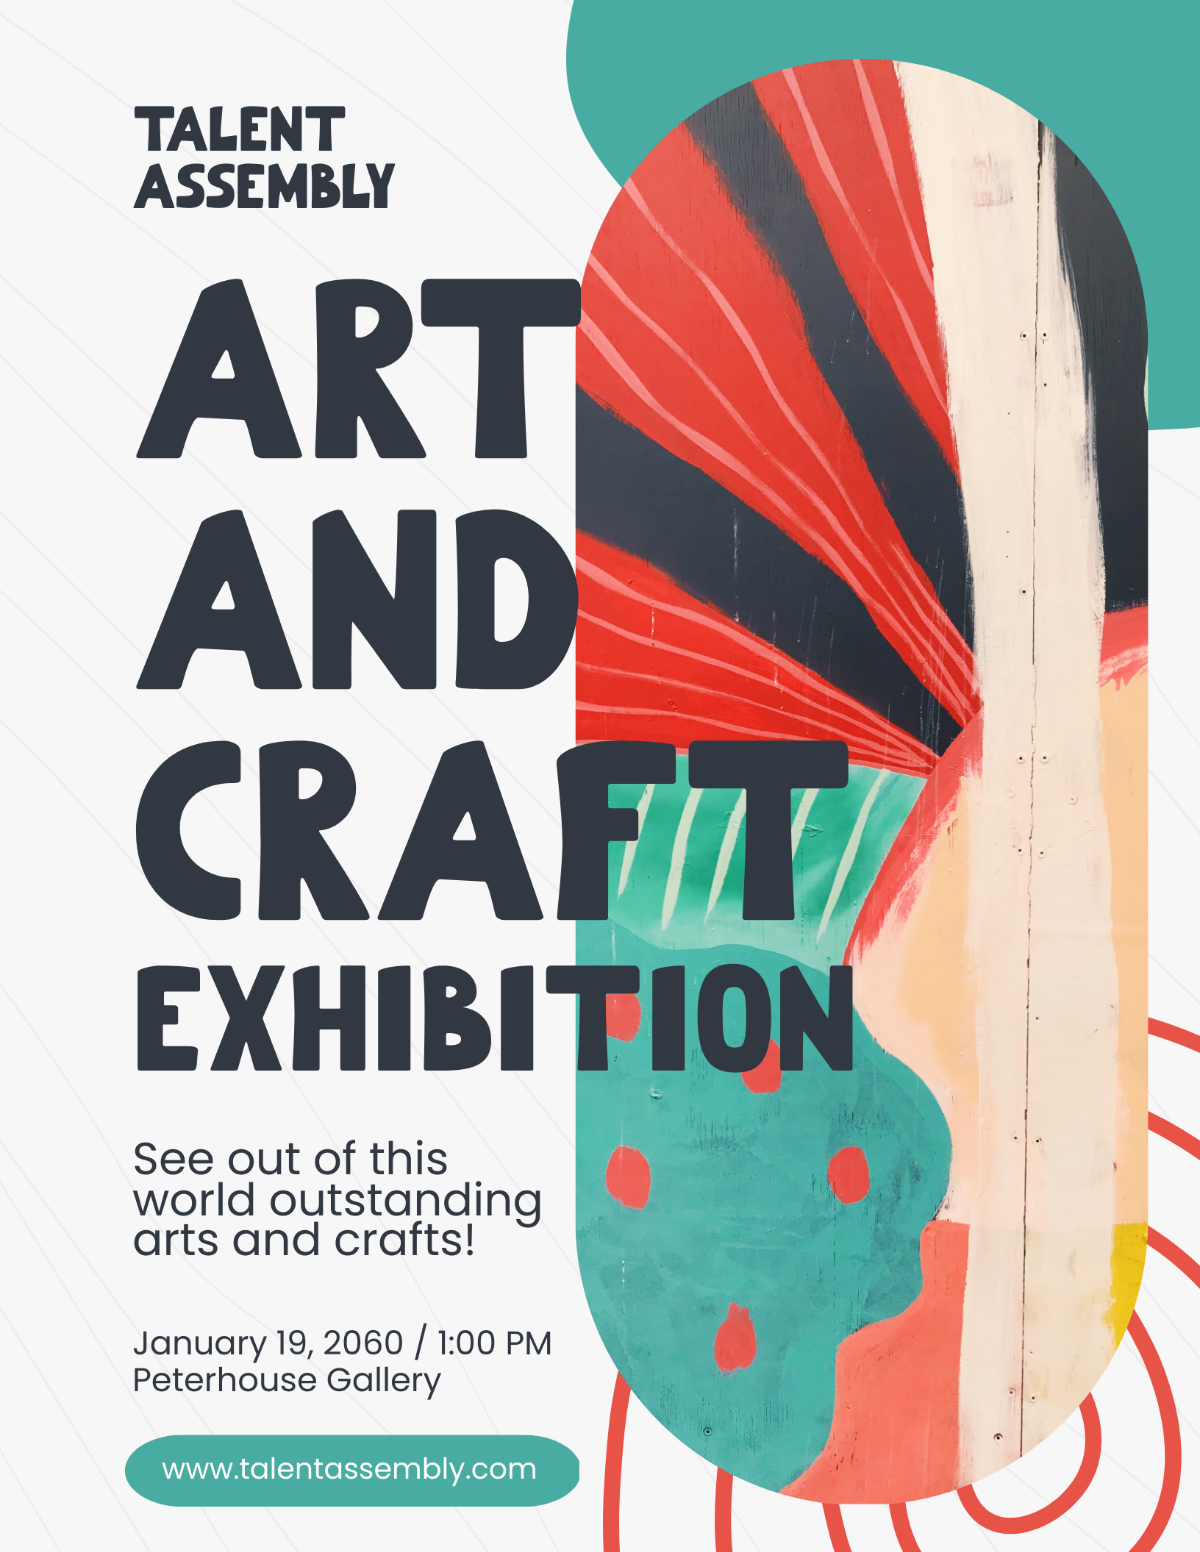 Free Art And Craft Exhibition Flyer Template